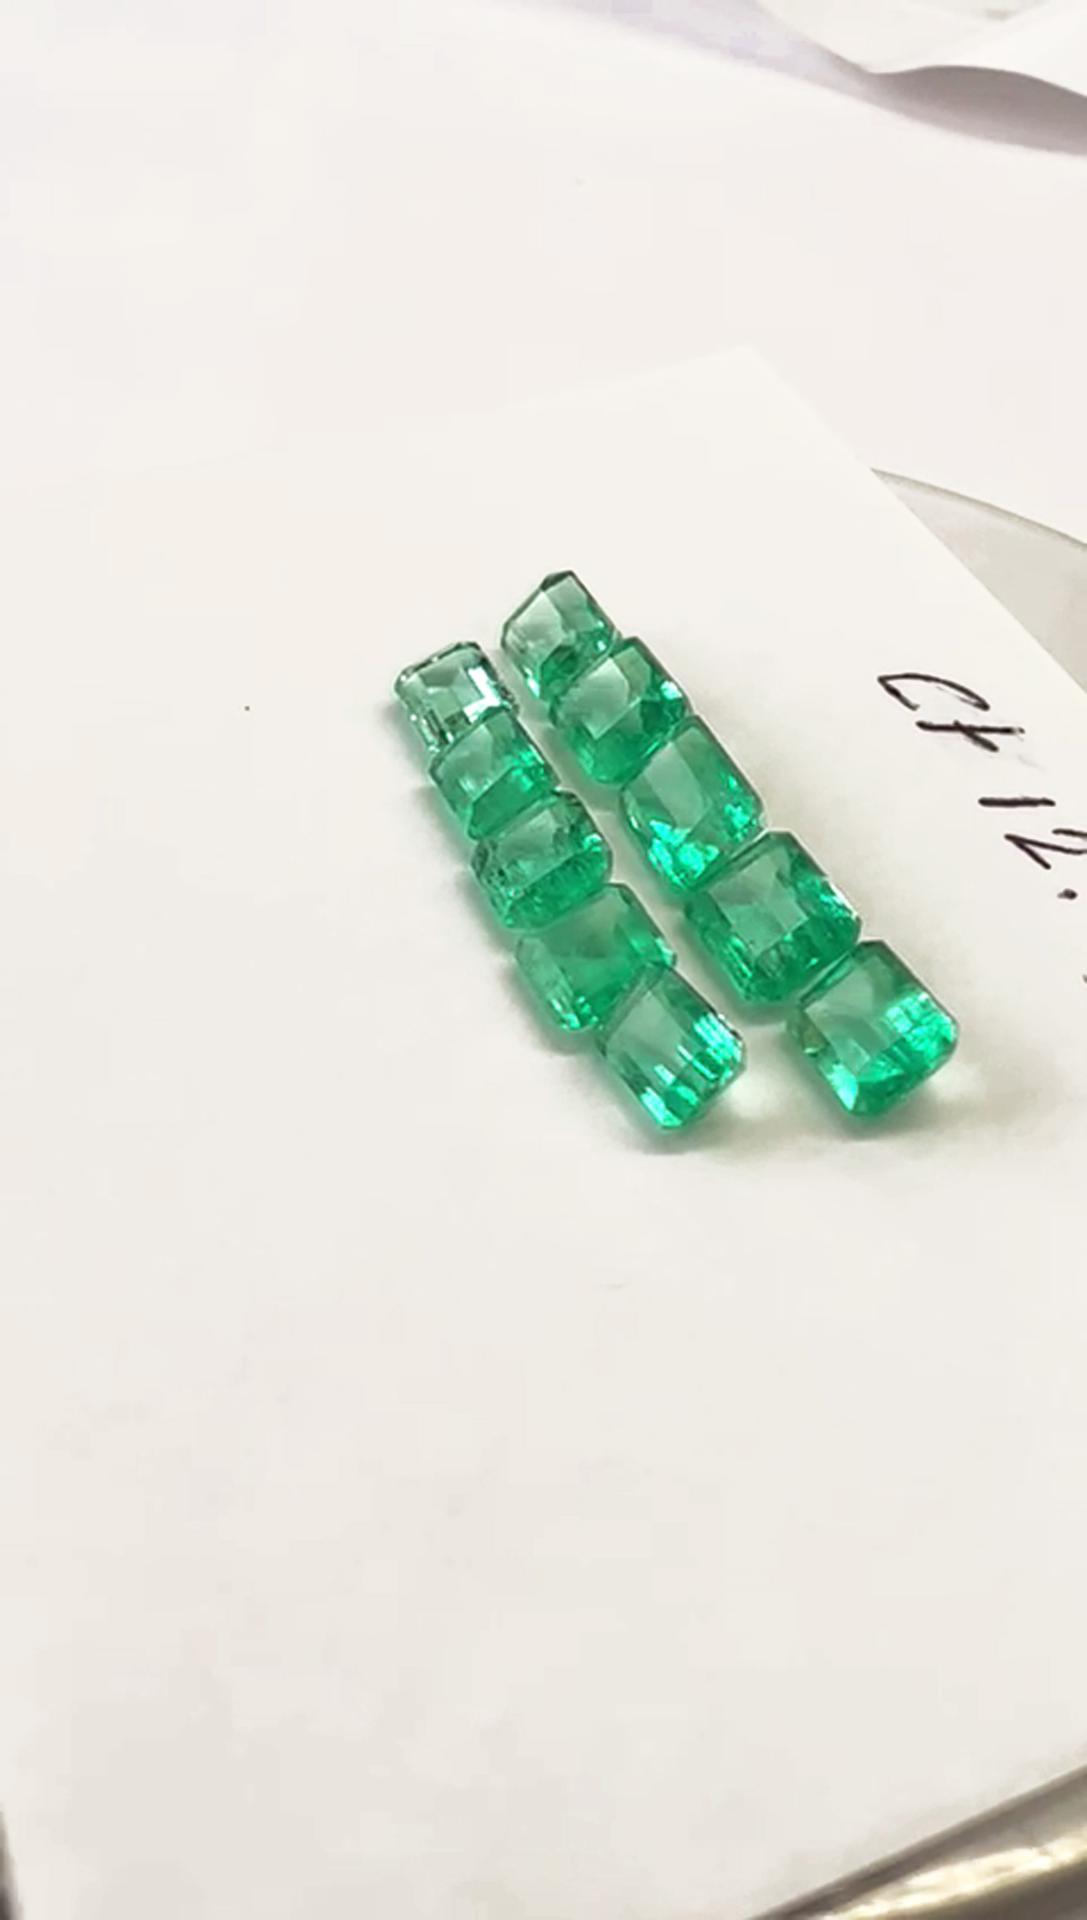 12.35 Ct. Colombian Emerald Lot 